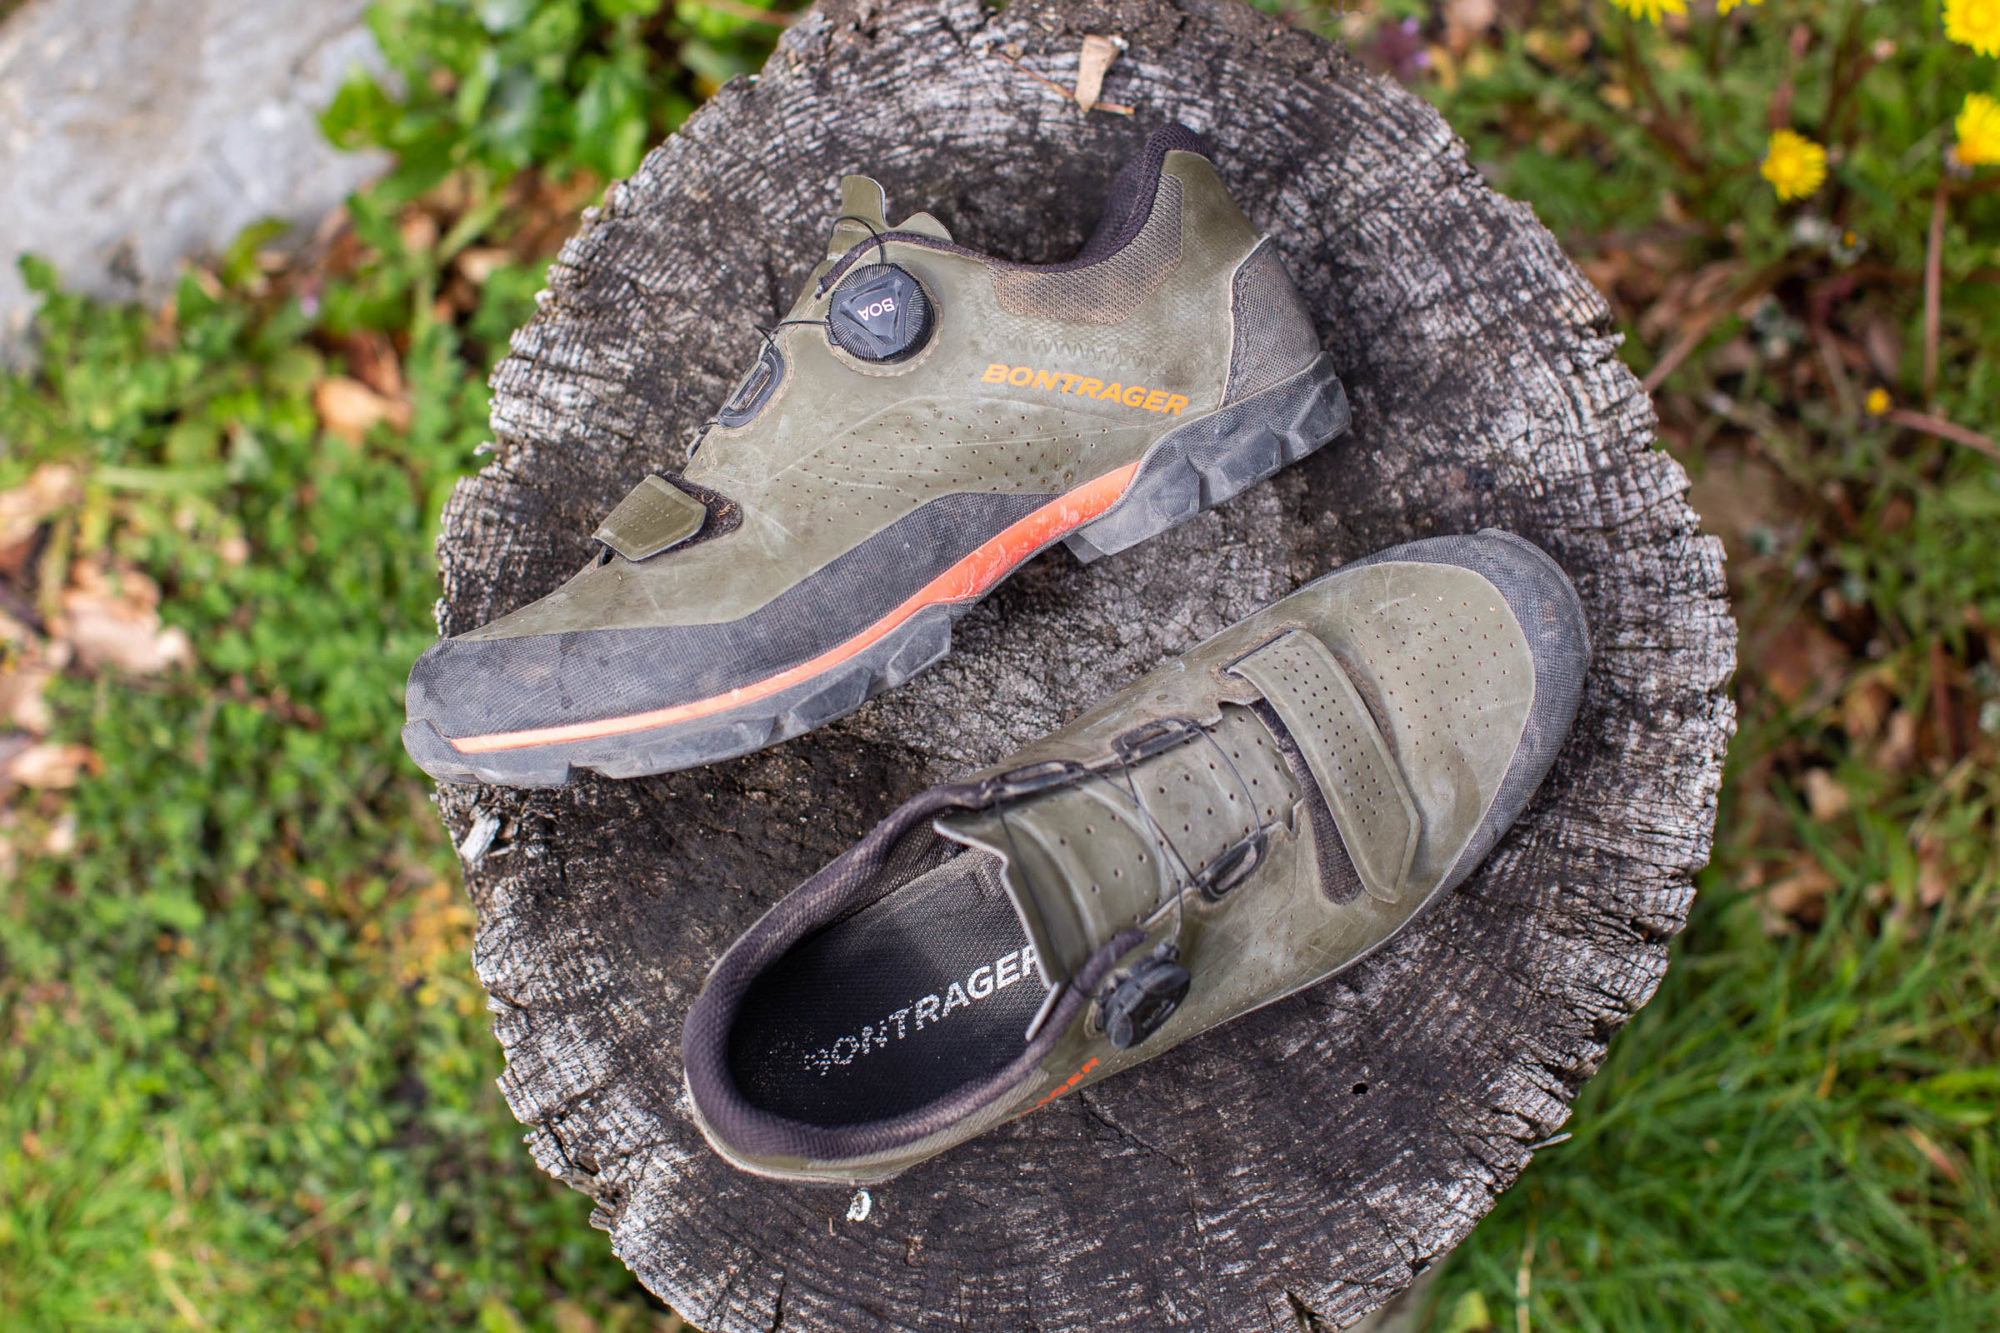 Bontrager Foray Shoe Review